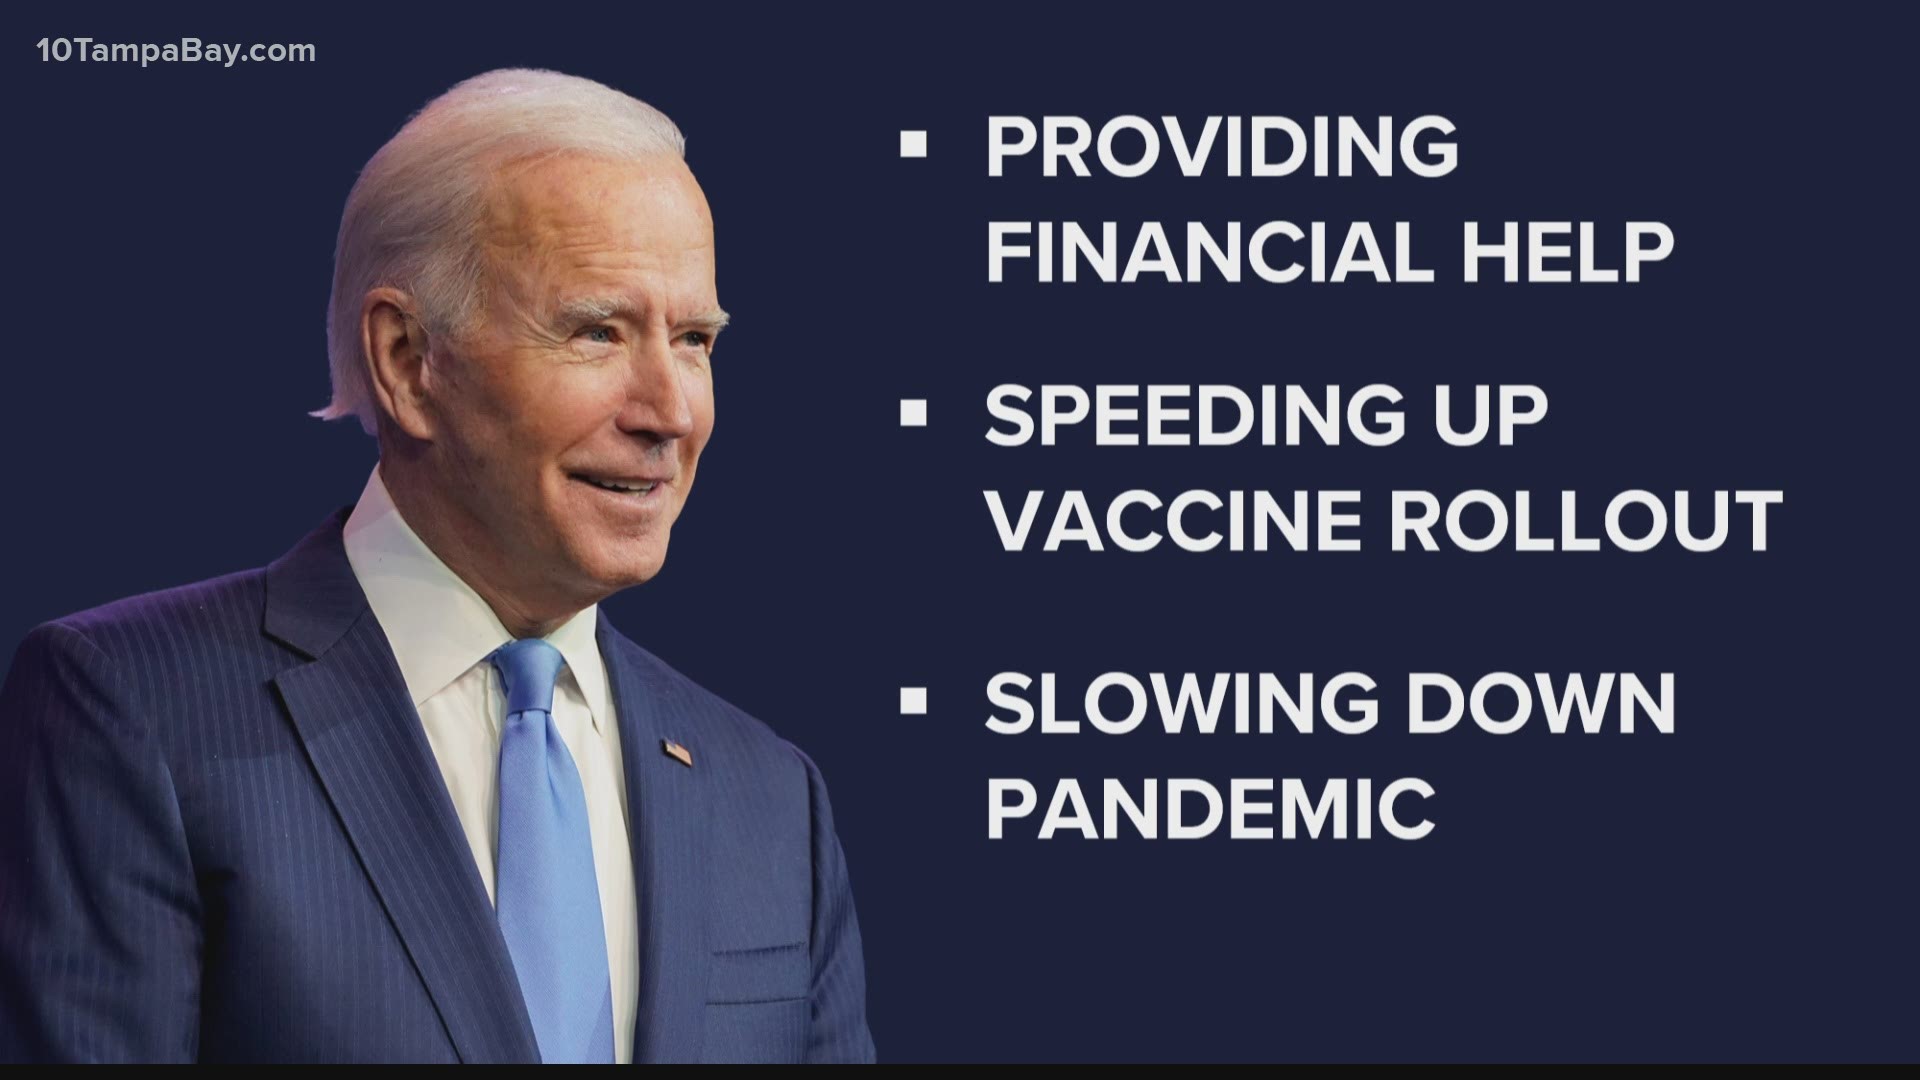 President-elect Joe Biden's $1.9 trillion coronavirus plan would add to the $600 payments already approved by Congress, plus provide more unemployment aid.